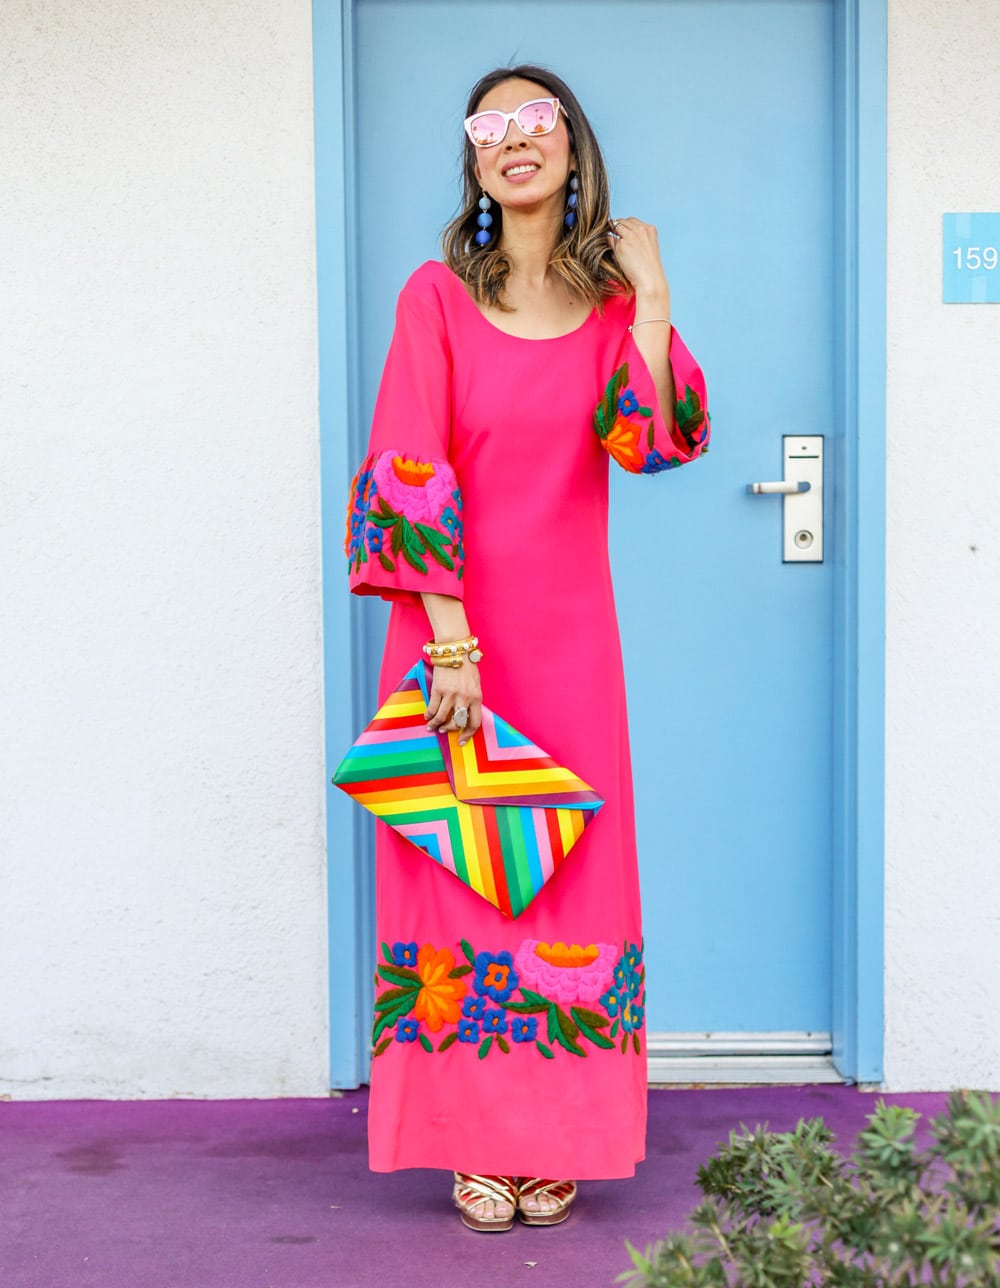 pink bell sleeve embroidered dress and rainbow clutch in palm springs california